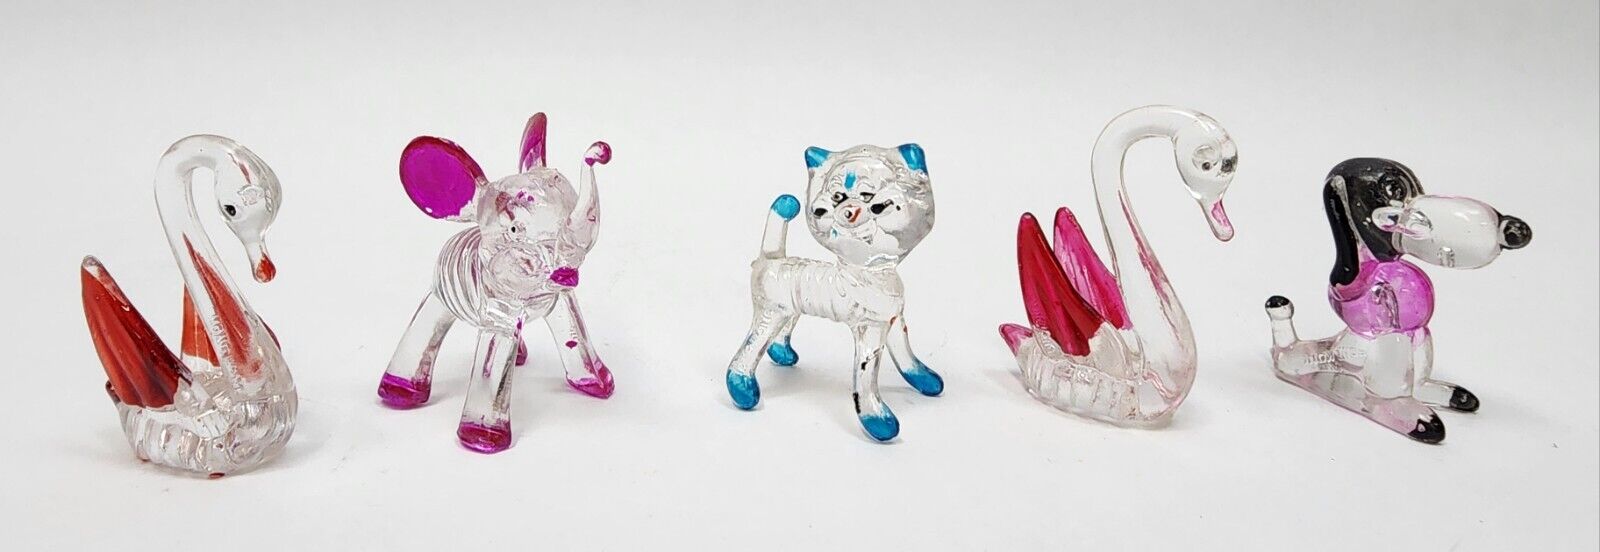 Cute Vintage 1970s Kitschy Acrylic Lucite Crystal Pets Pre-owned See Pics